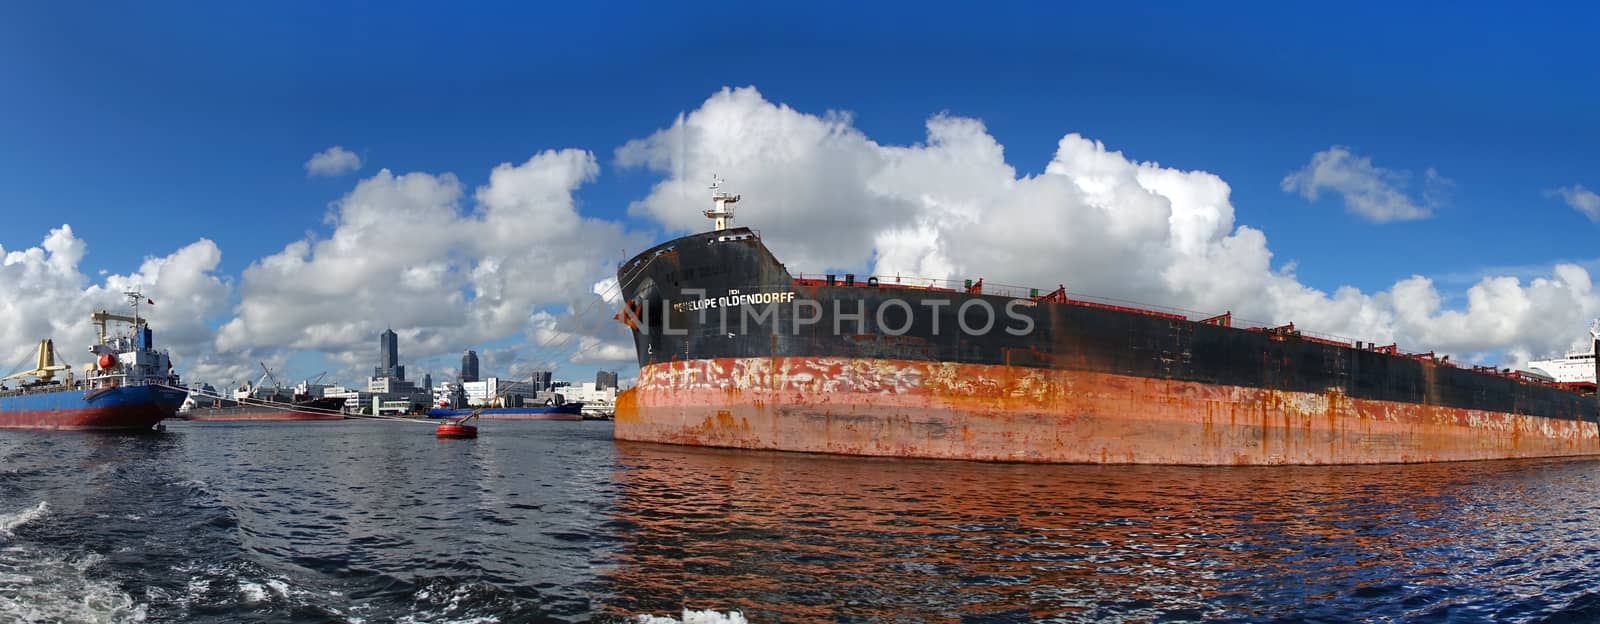 KAOHSIUNG, TAIWAN -- JUNE 2, 2019: Two large cargo ships are docked in Kaohsiung Port